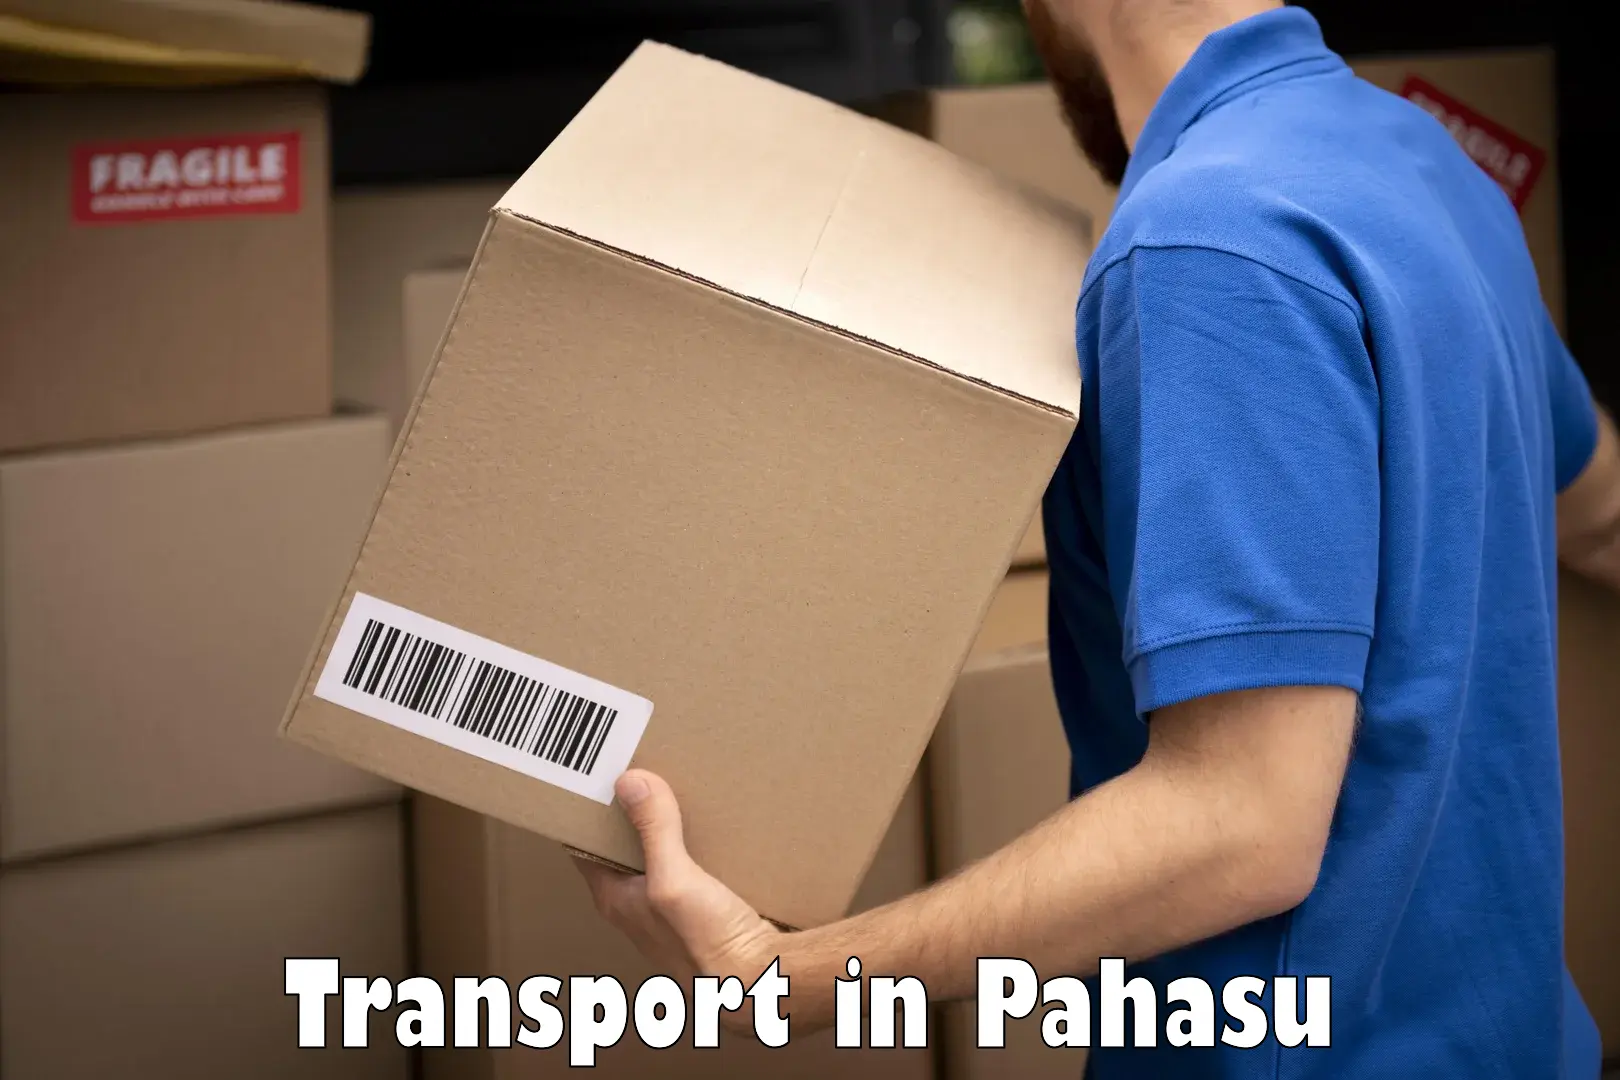 Express transport services in Pahasu